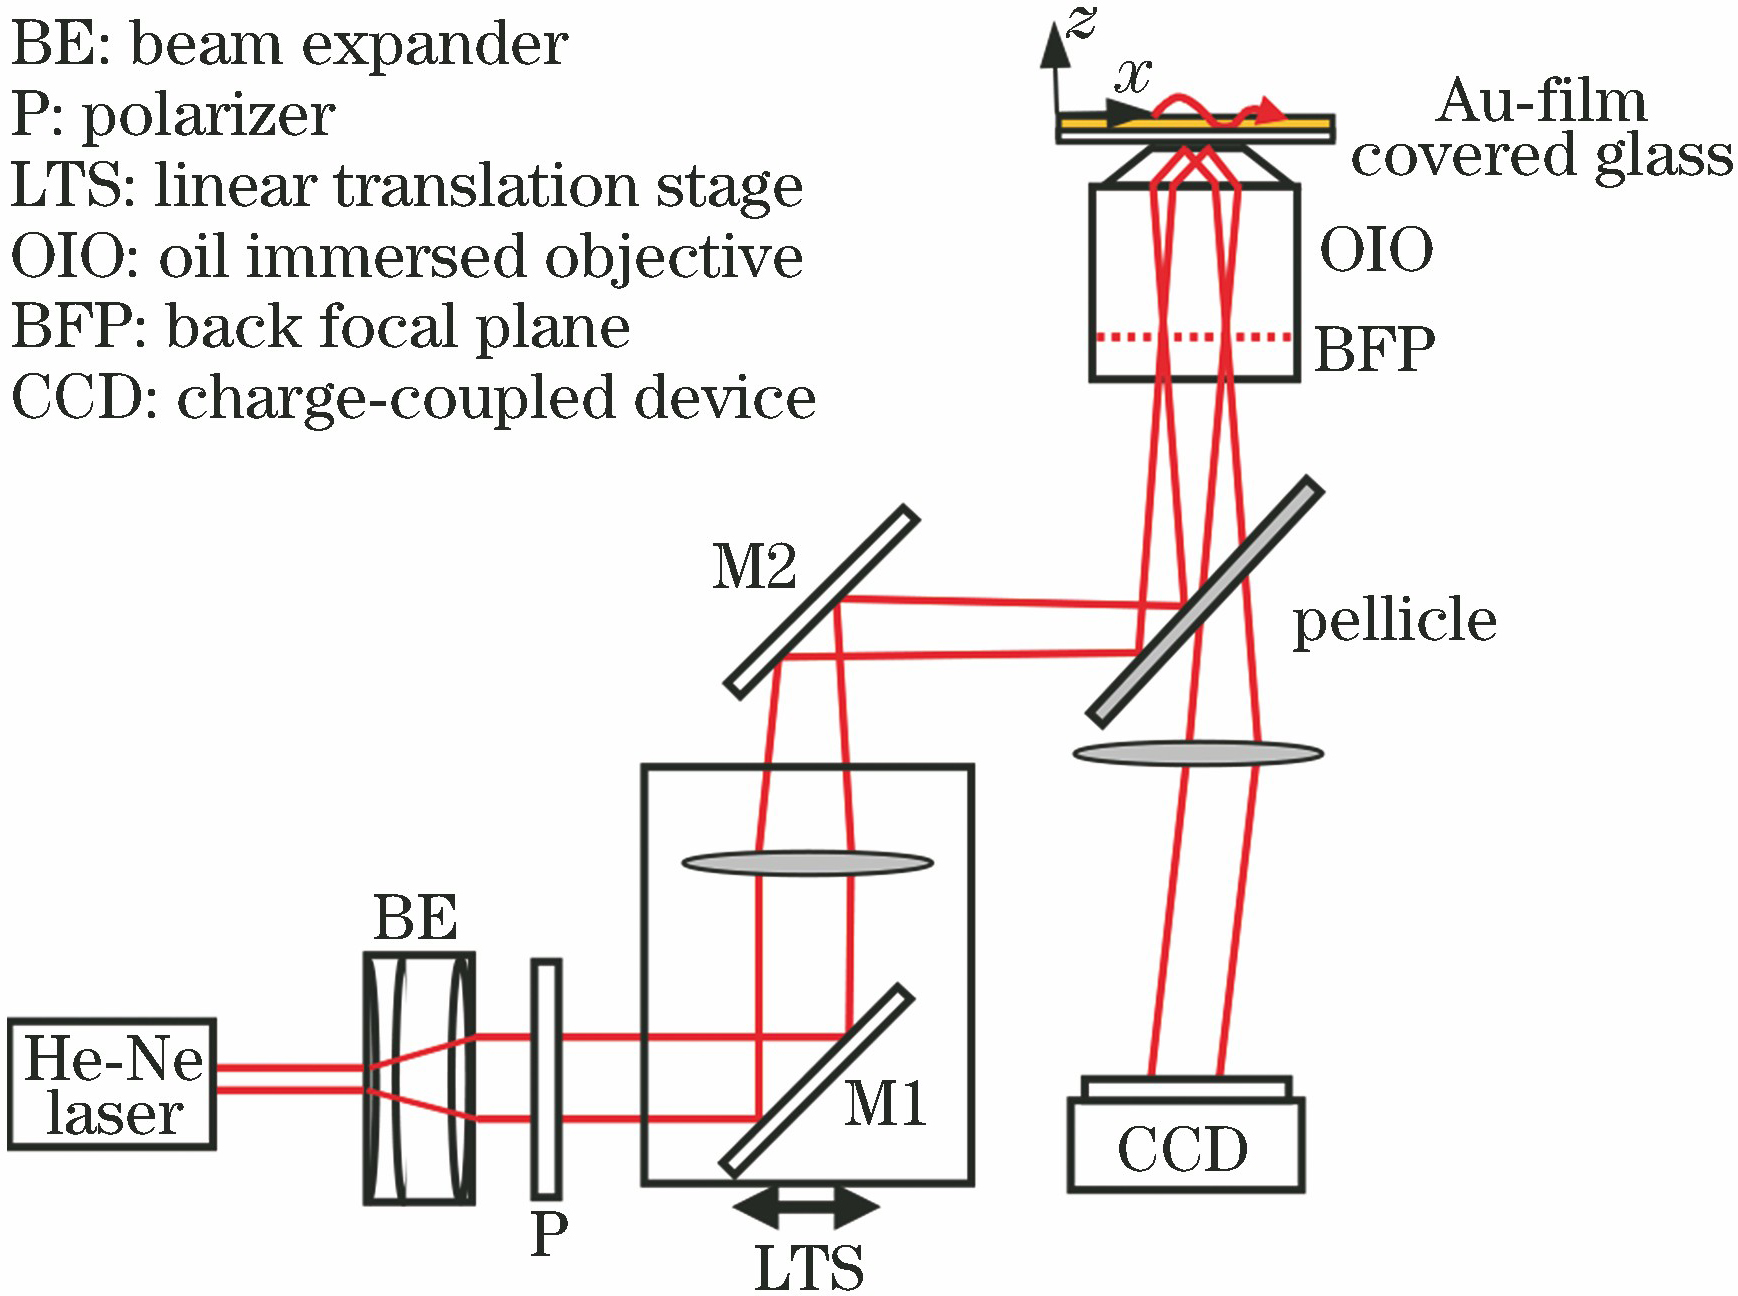 Schematic of optical path of SPP microscopic imaging